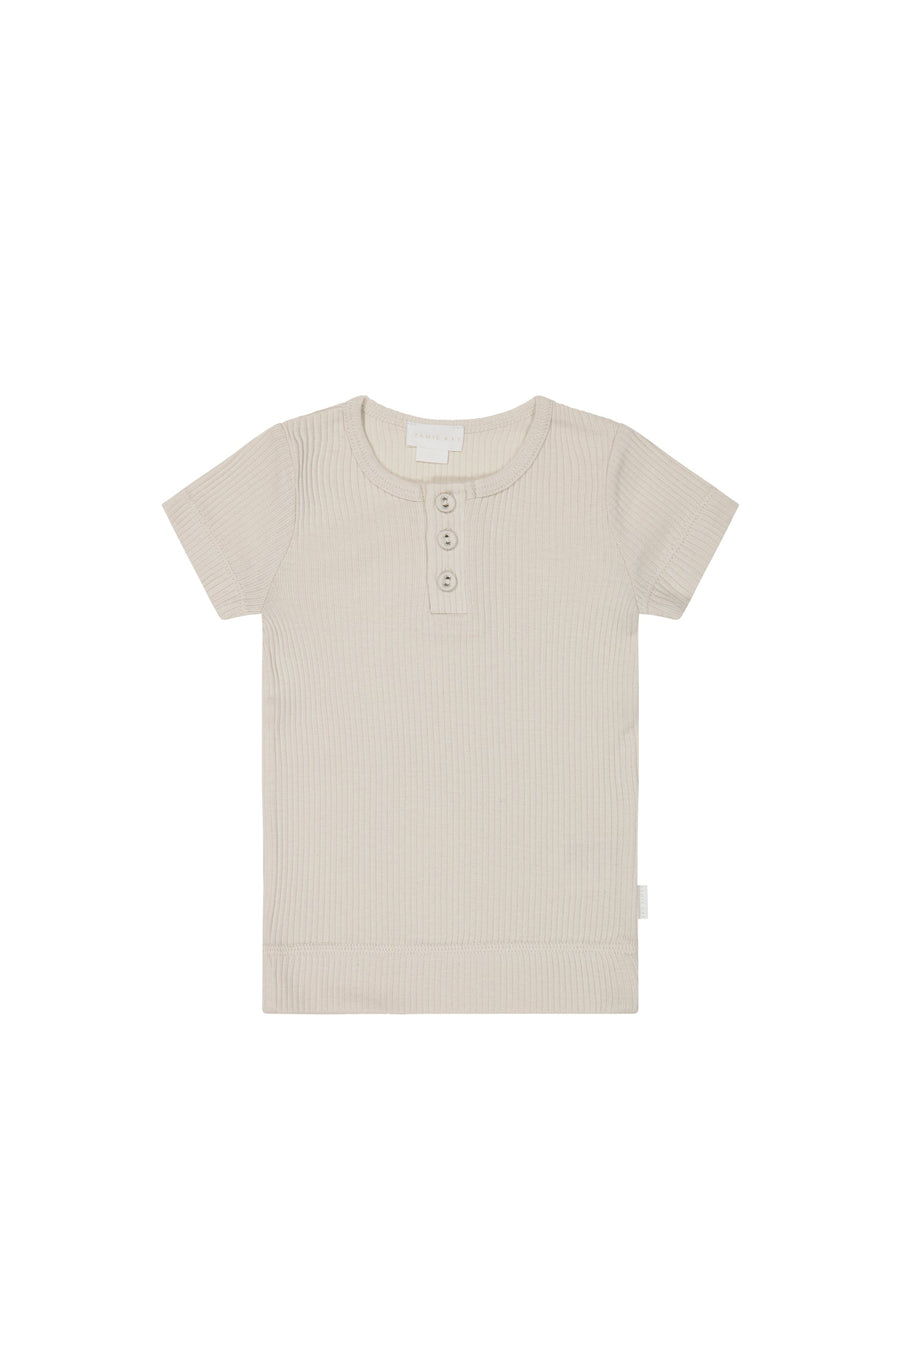 Organic Cotton Modal Henley Tee - Swan Childrens Top from Jamie Kay USA